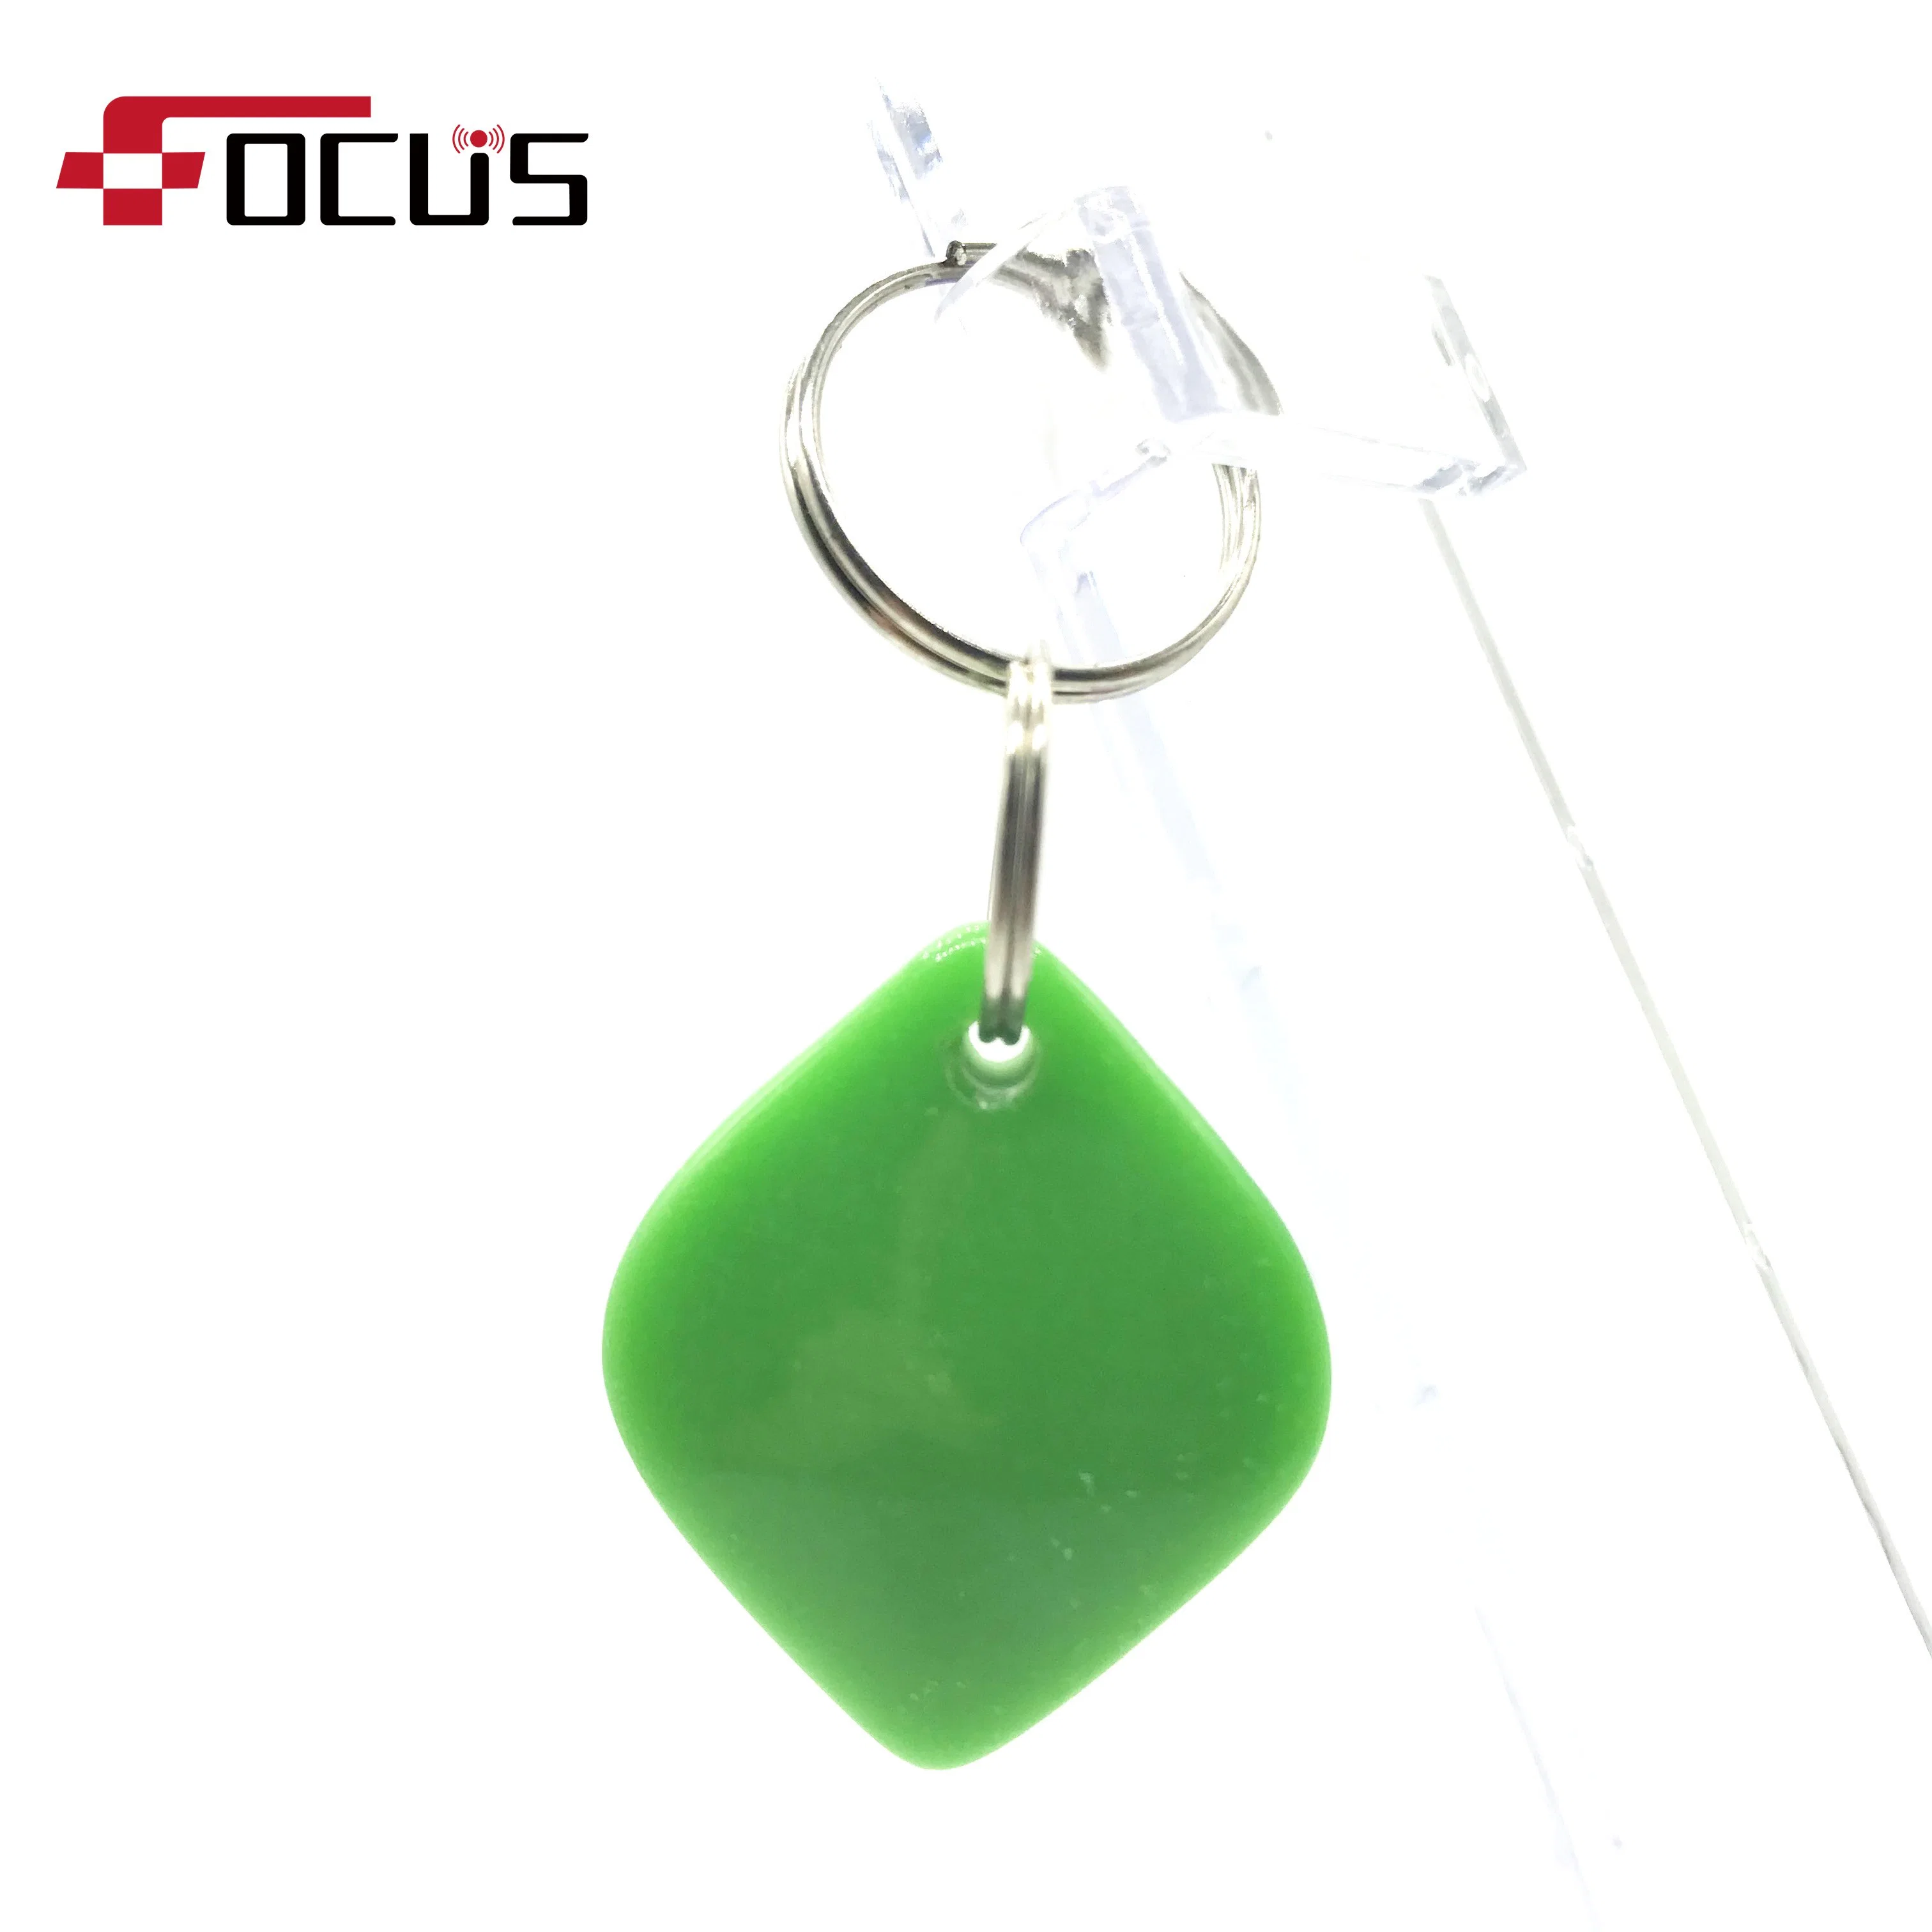 Factory Price Rewritable Passive T5577 RFID Keyfob for Access Control